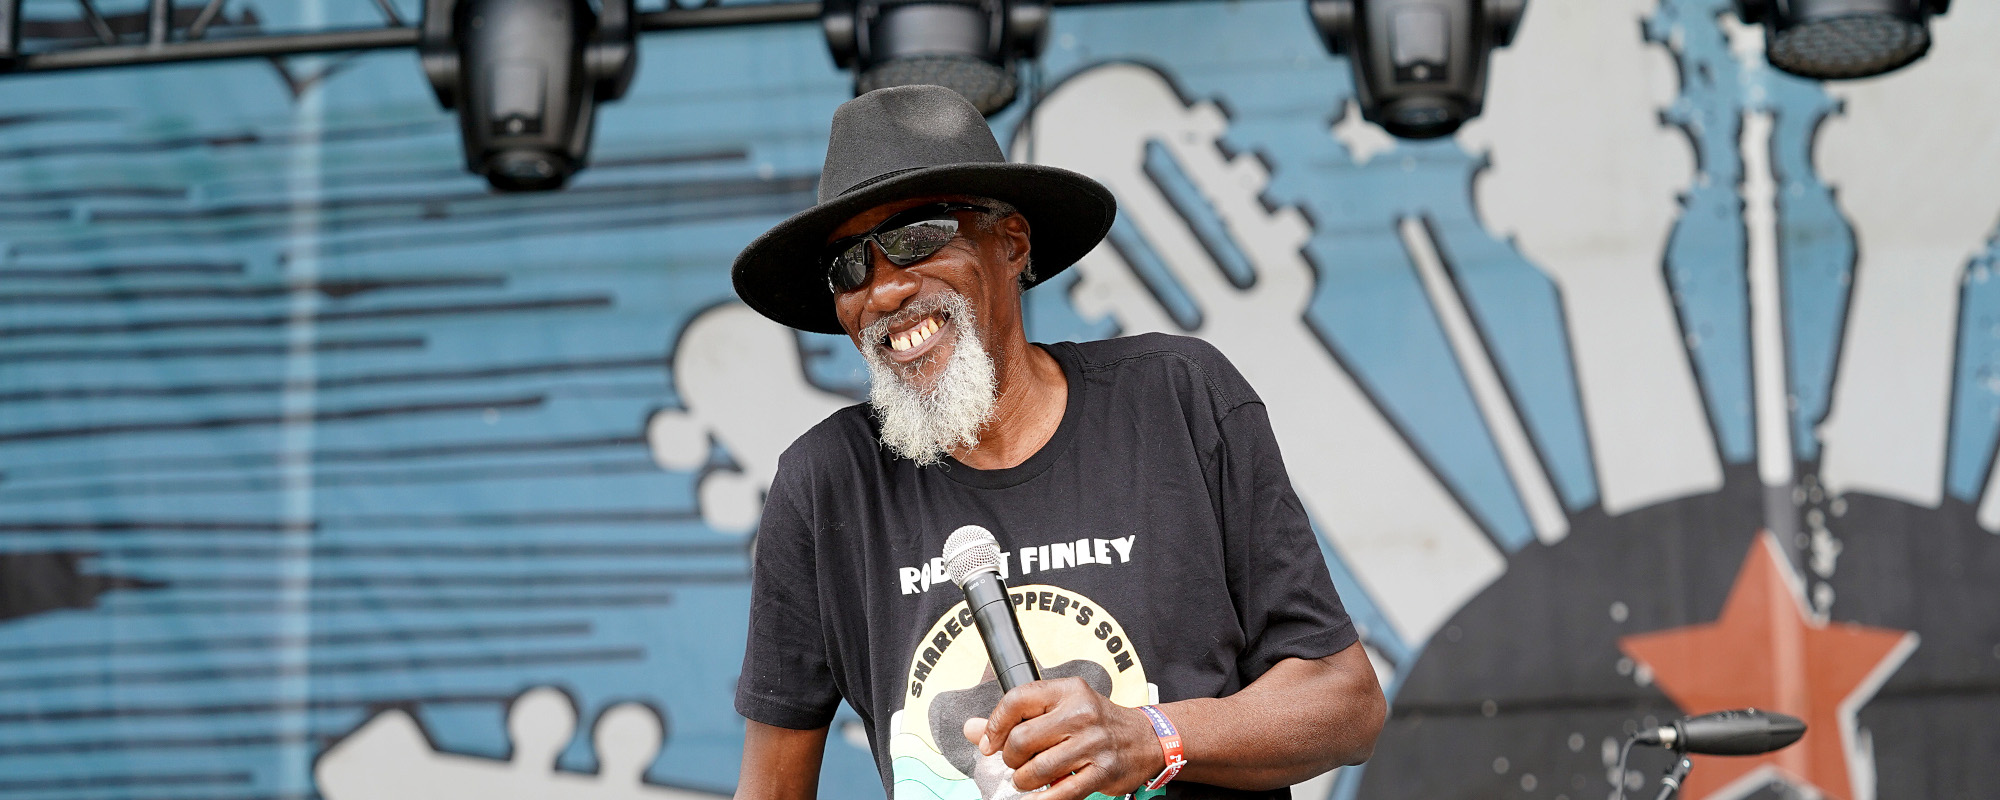 Review: Robert Finley’s ‘Black Bayou’ Exudes Raw, Swampy Authenticity